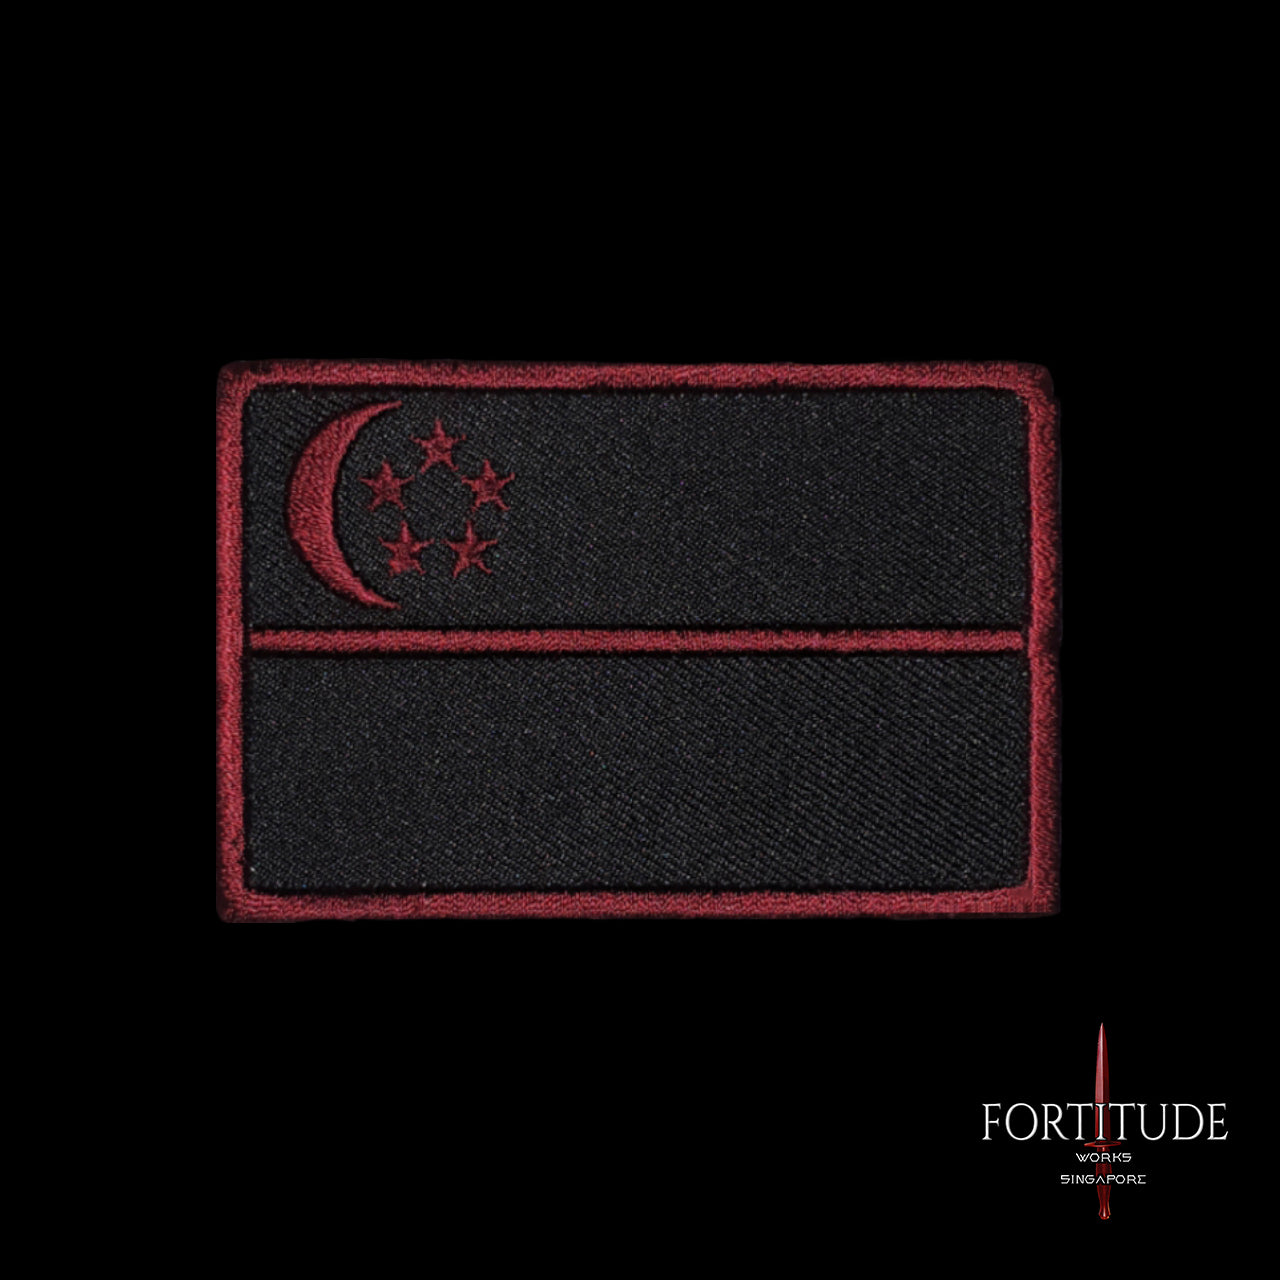 CRIMSON RED SG FLAG PATCH (Large) - FORTITUDE WORKS SINGAPORE